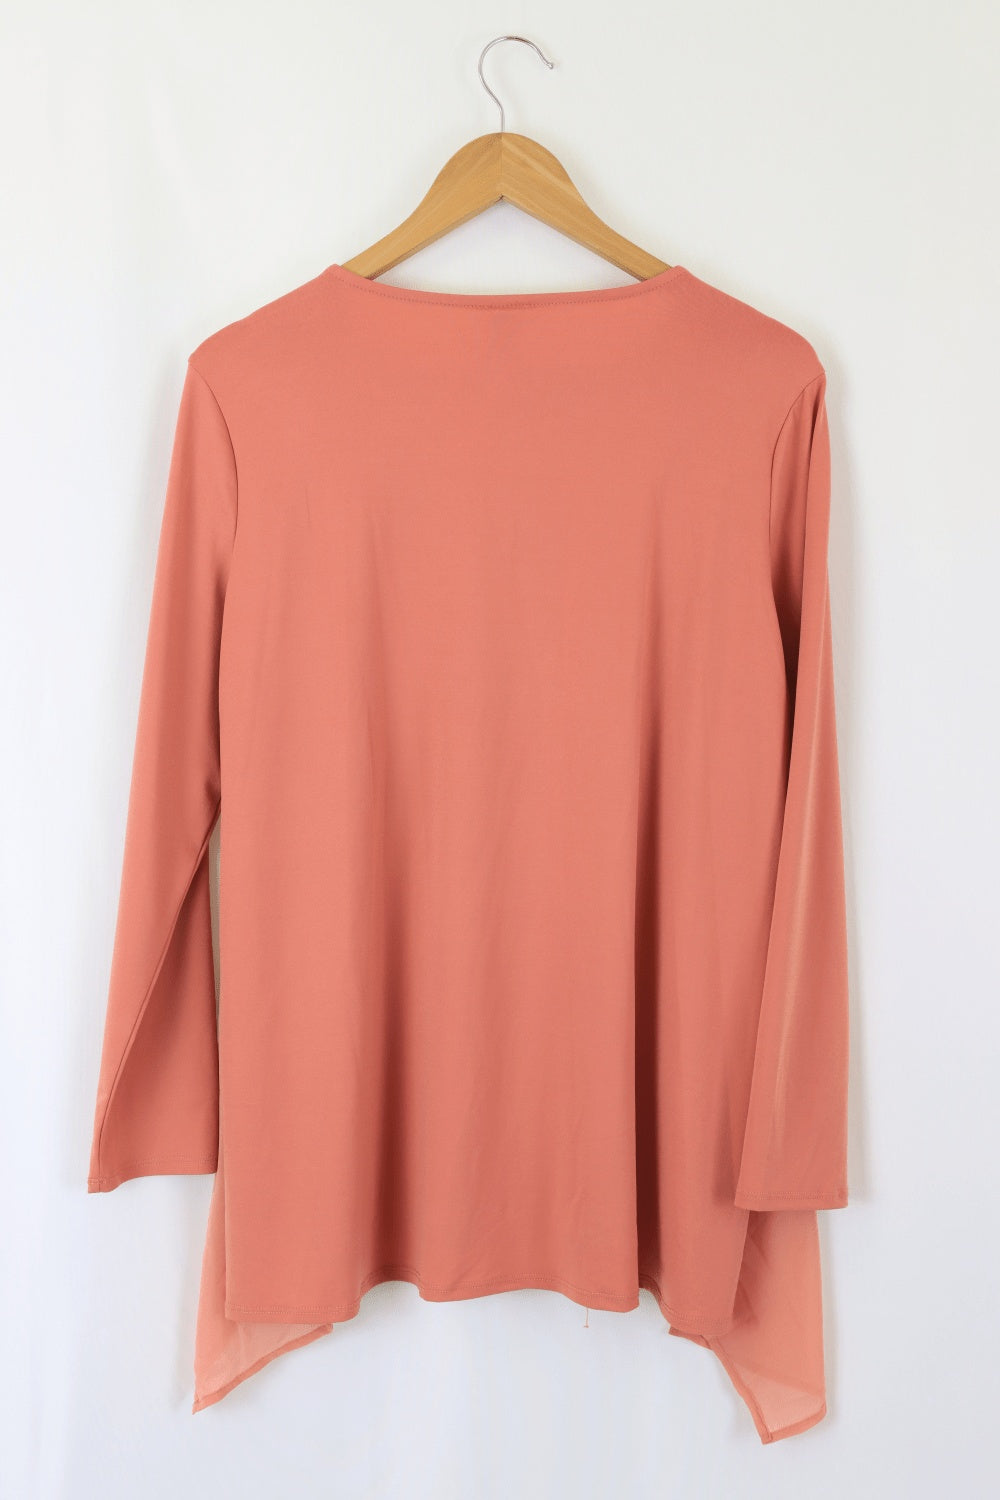 Wynne Layers Pink Top M